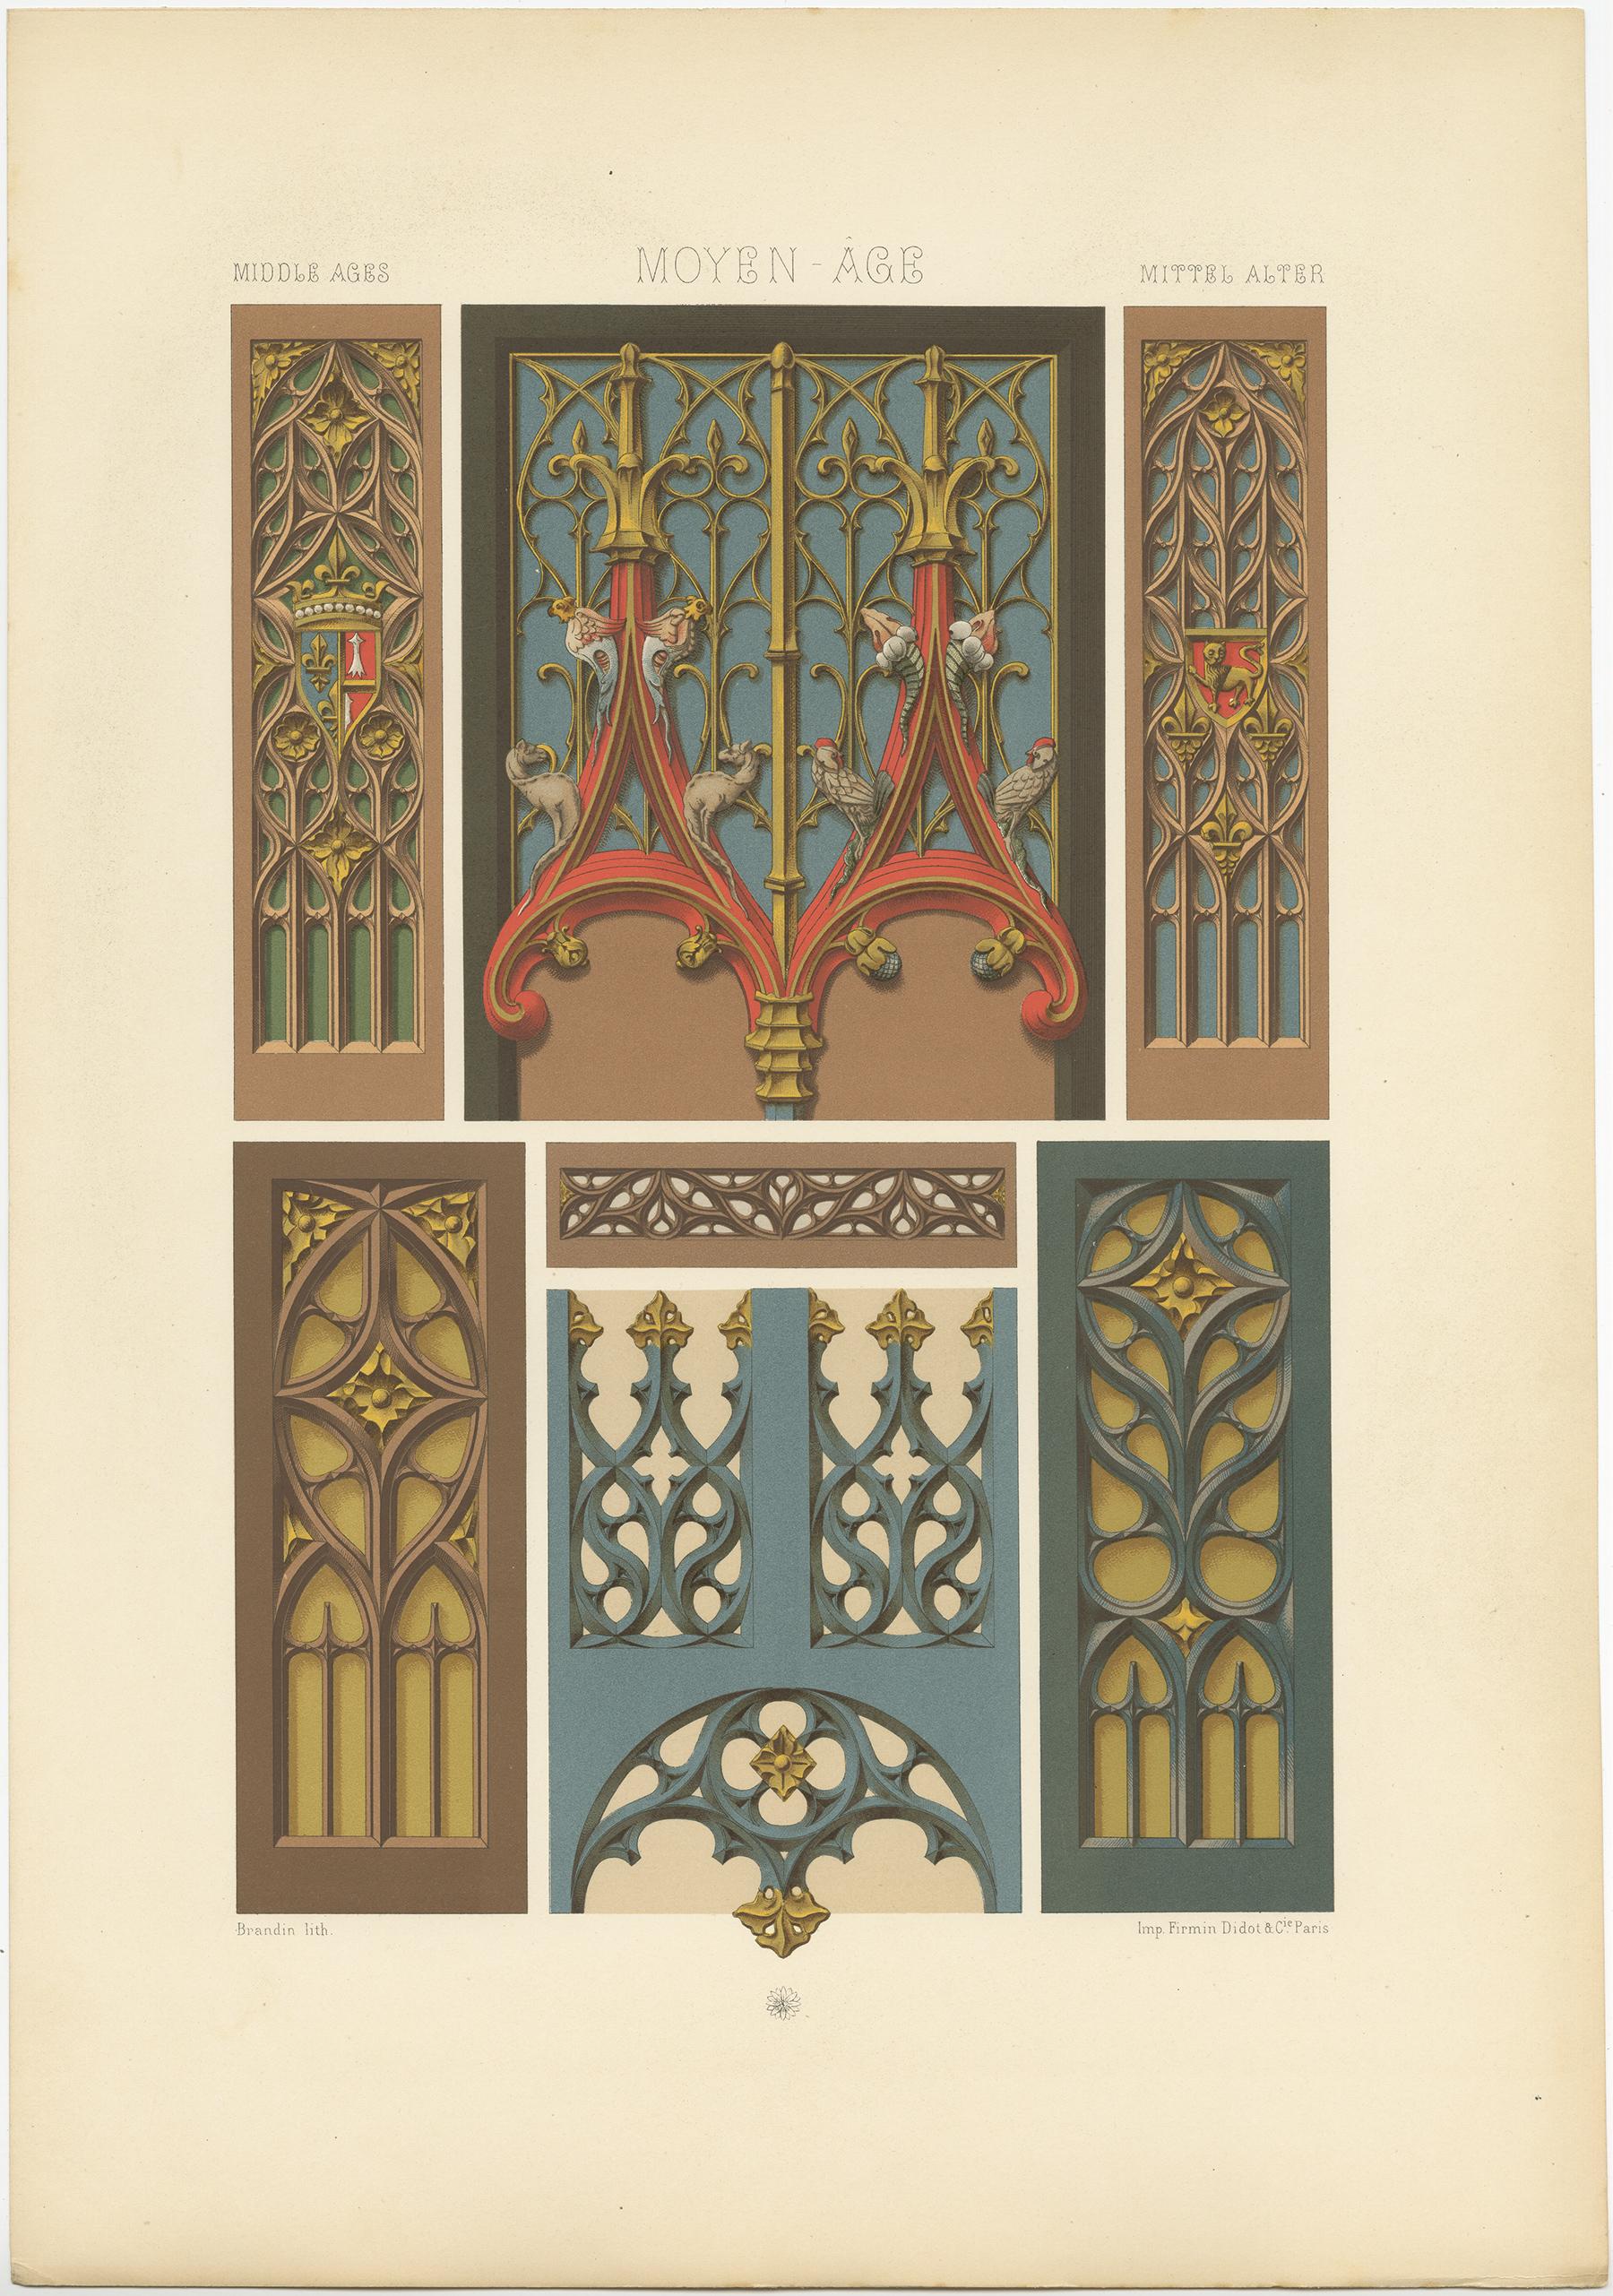 Antique print titled 'Middle Ages - Moyen Age - Mittel Alter'. Chromolithograph of painted and gilt woodwork 15th century ornaments.
This print originates from 'l'Ornement Polychrome' by Auguste Racinet. Published, circa 1890.